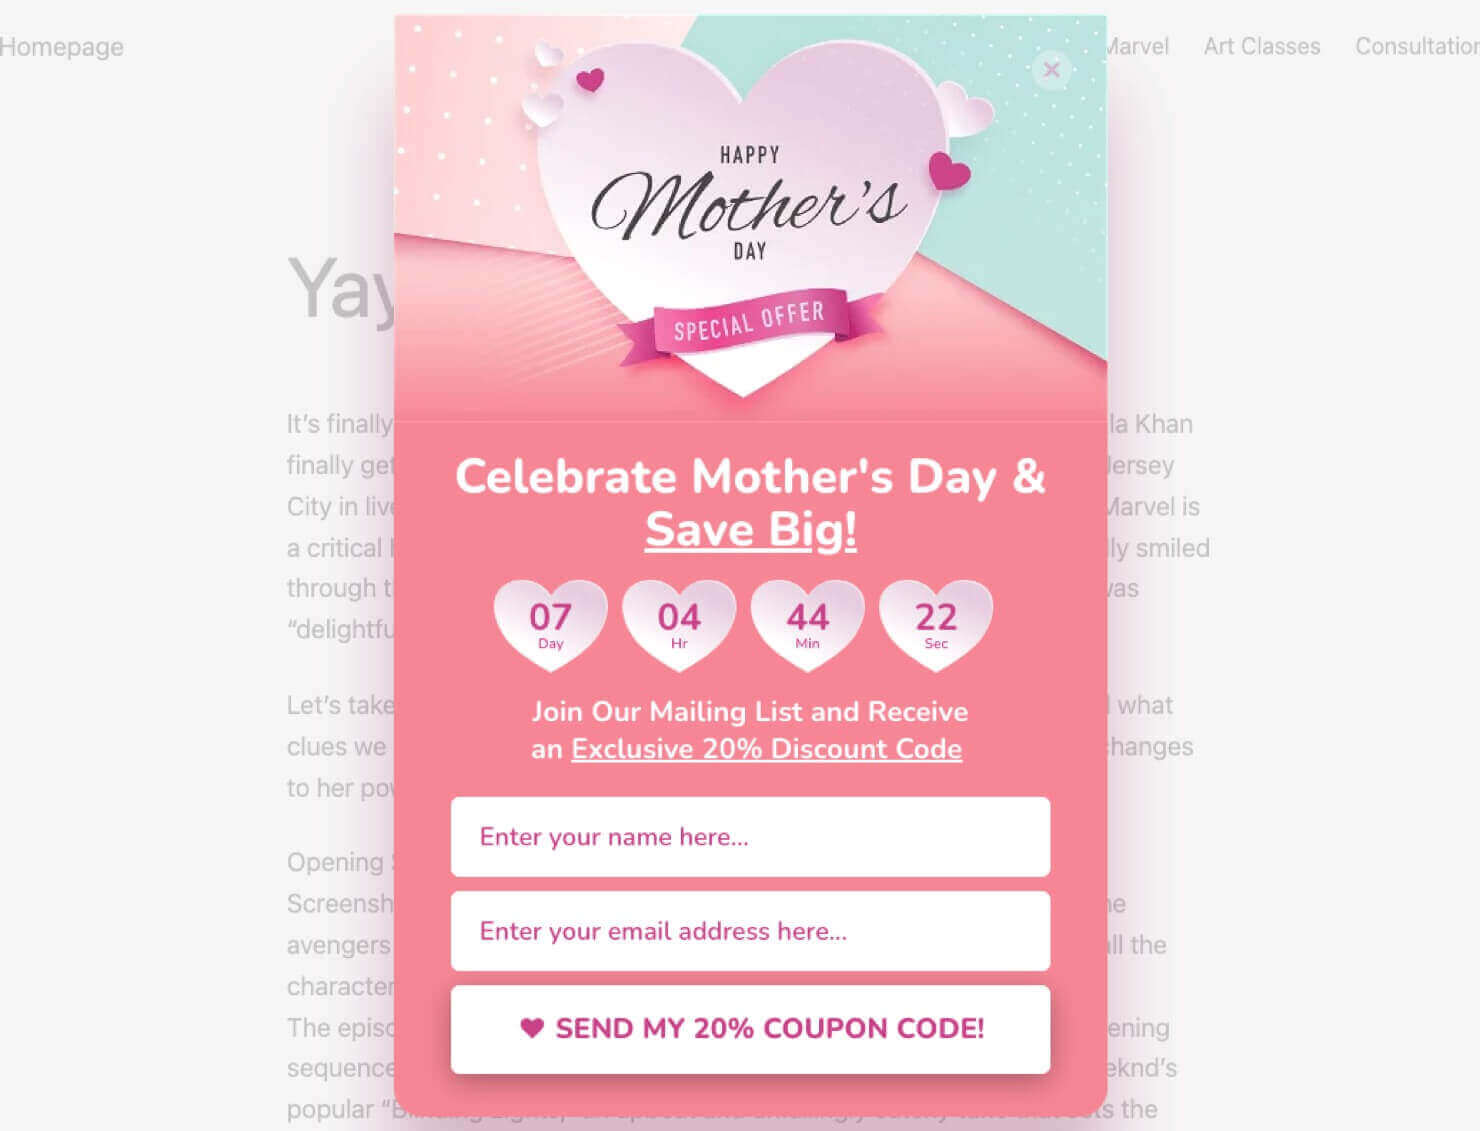 OptinMonster popup template. It says "Happy Mother's Day Special Offer. Celebrate Mother's Day & Save Big!" Then there's a countdown timer. Text continues, "Join our Mailing List and Receive an Exclusive 20% Discount Code." There are fields for the user's name and email address, and a CTA button that says "Send my 20% Coupon Code!"